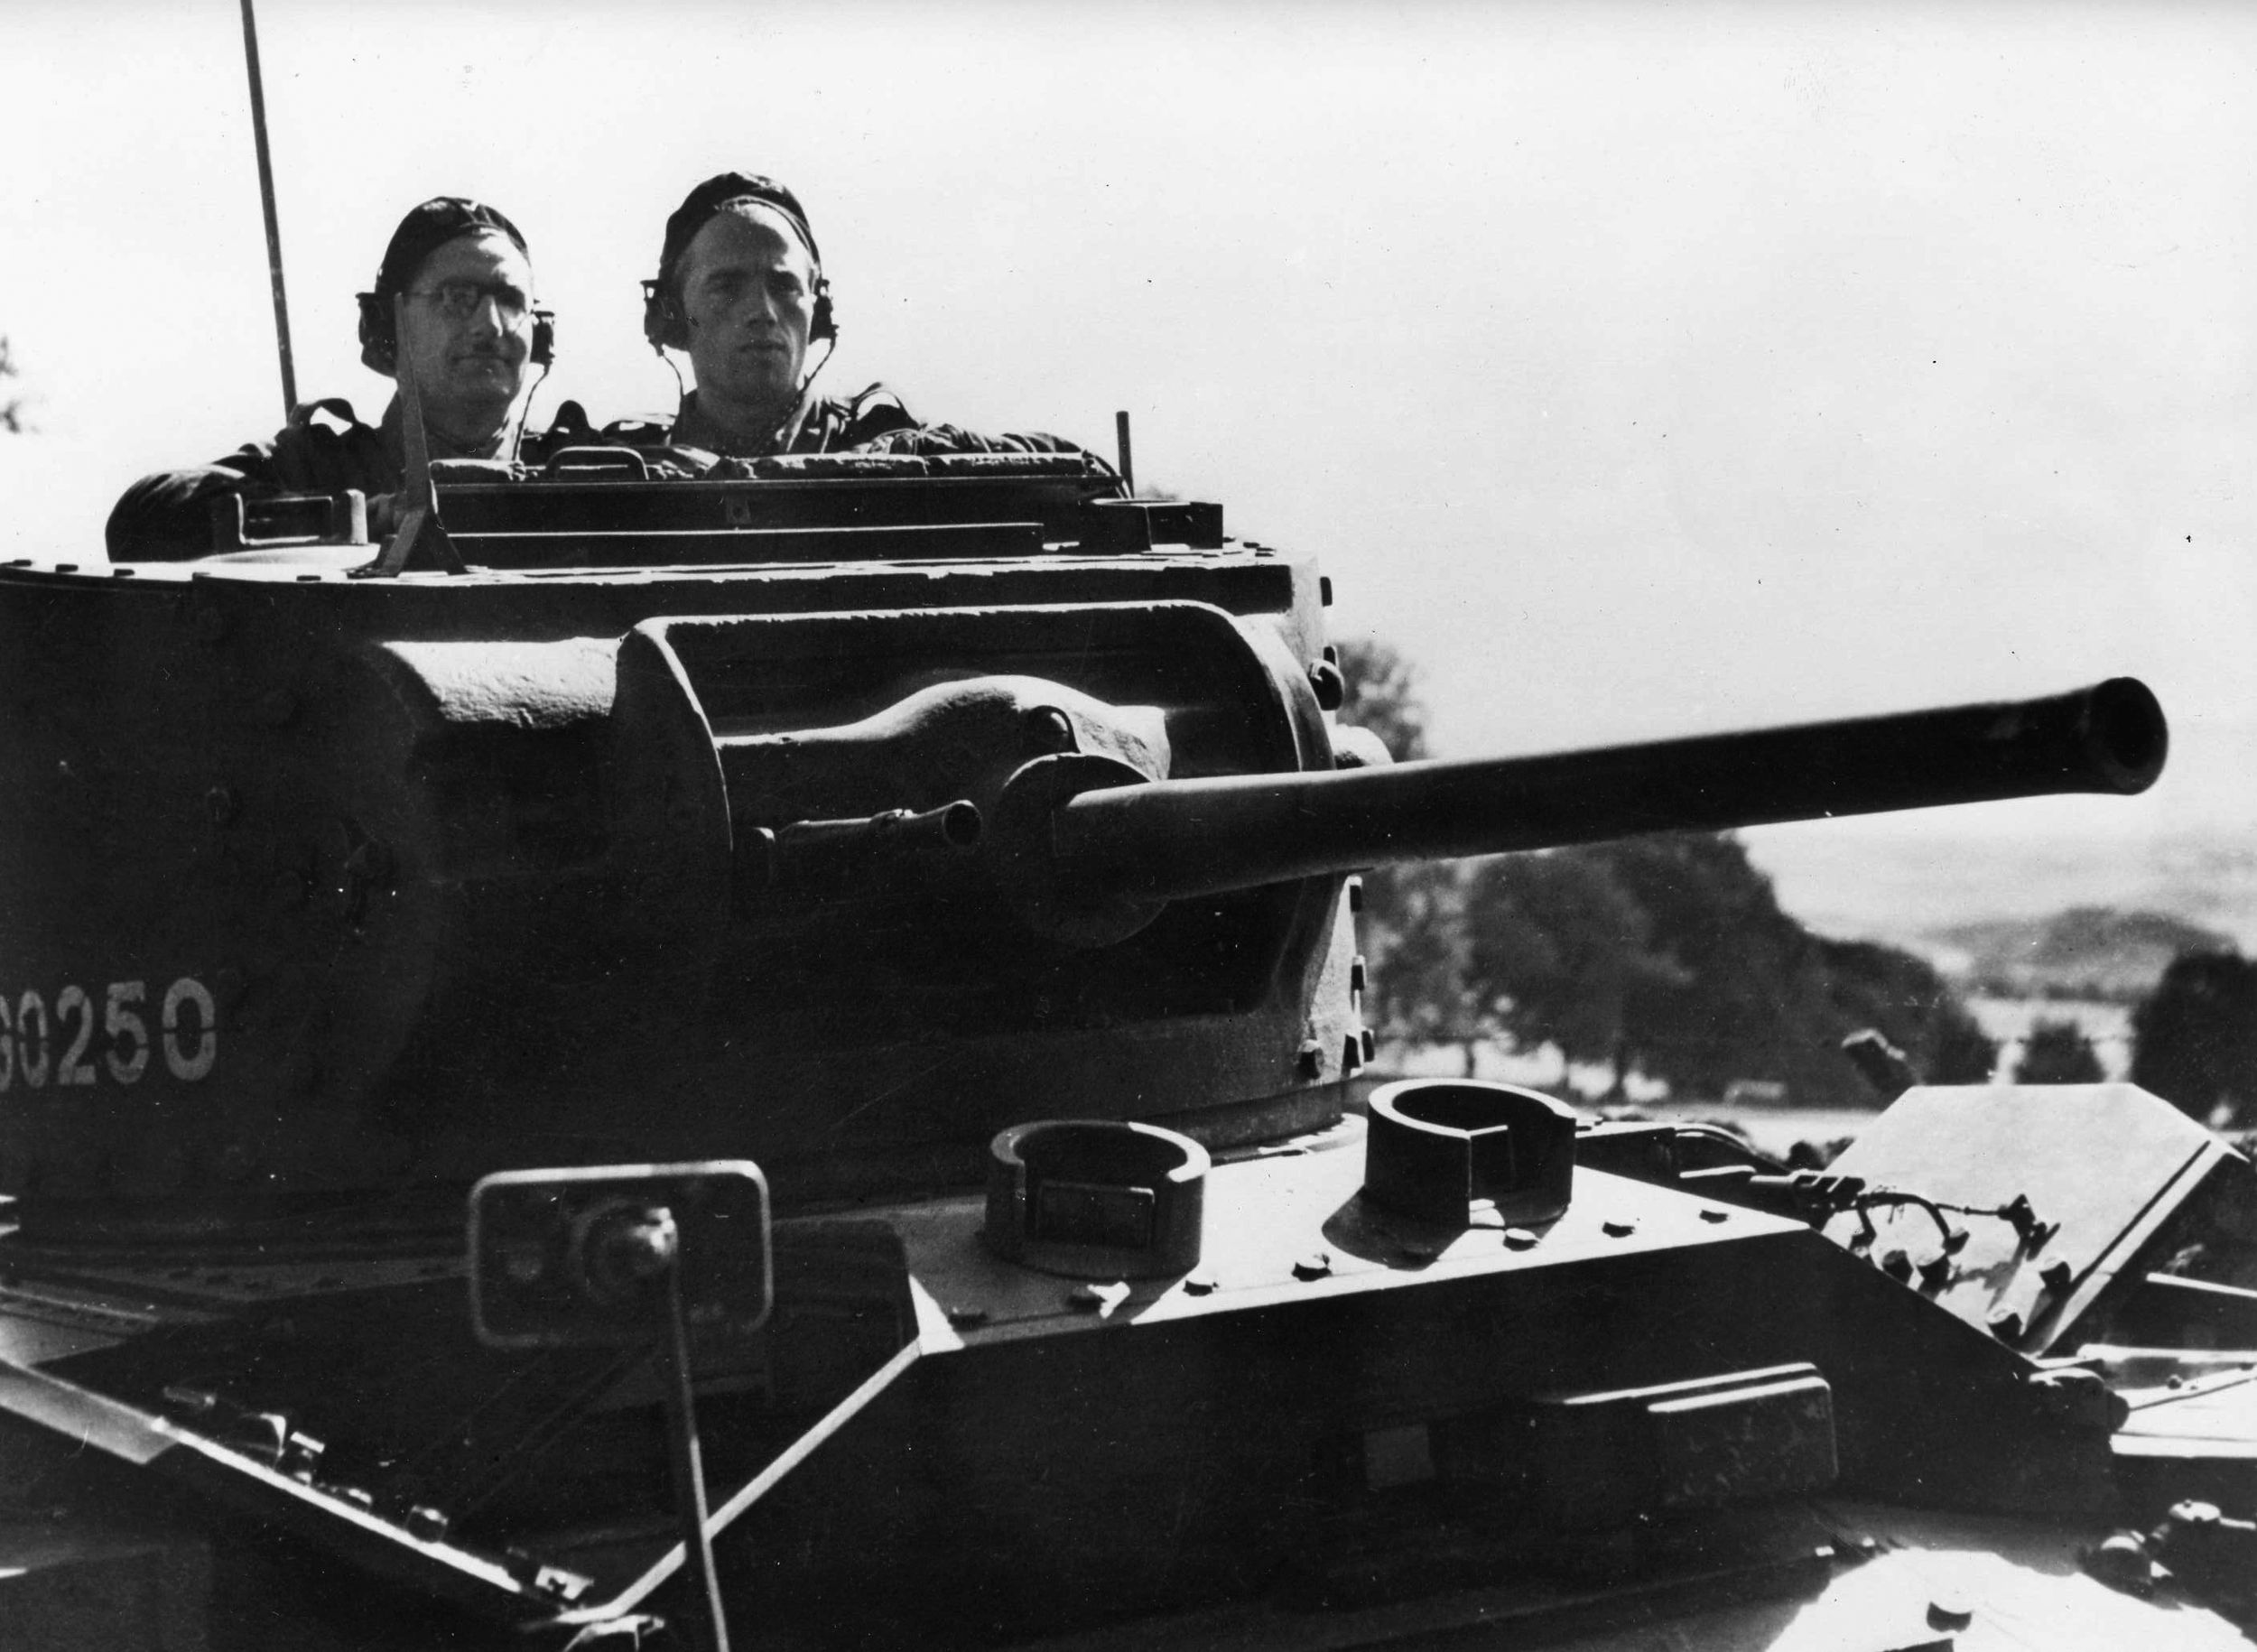 Two Polish tankers peer from the turret of their armored vehicle as they rumble ahead.  This image was taken somewhere in the Near East. Polish troops served in numerous locales during the war. (Both: National Archives)